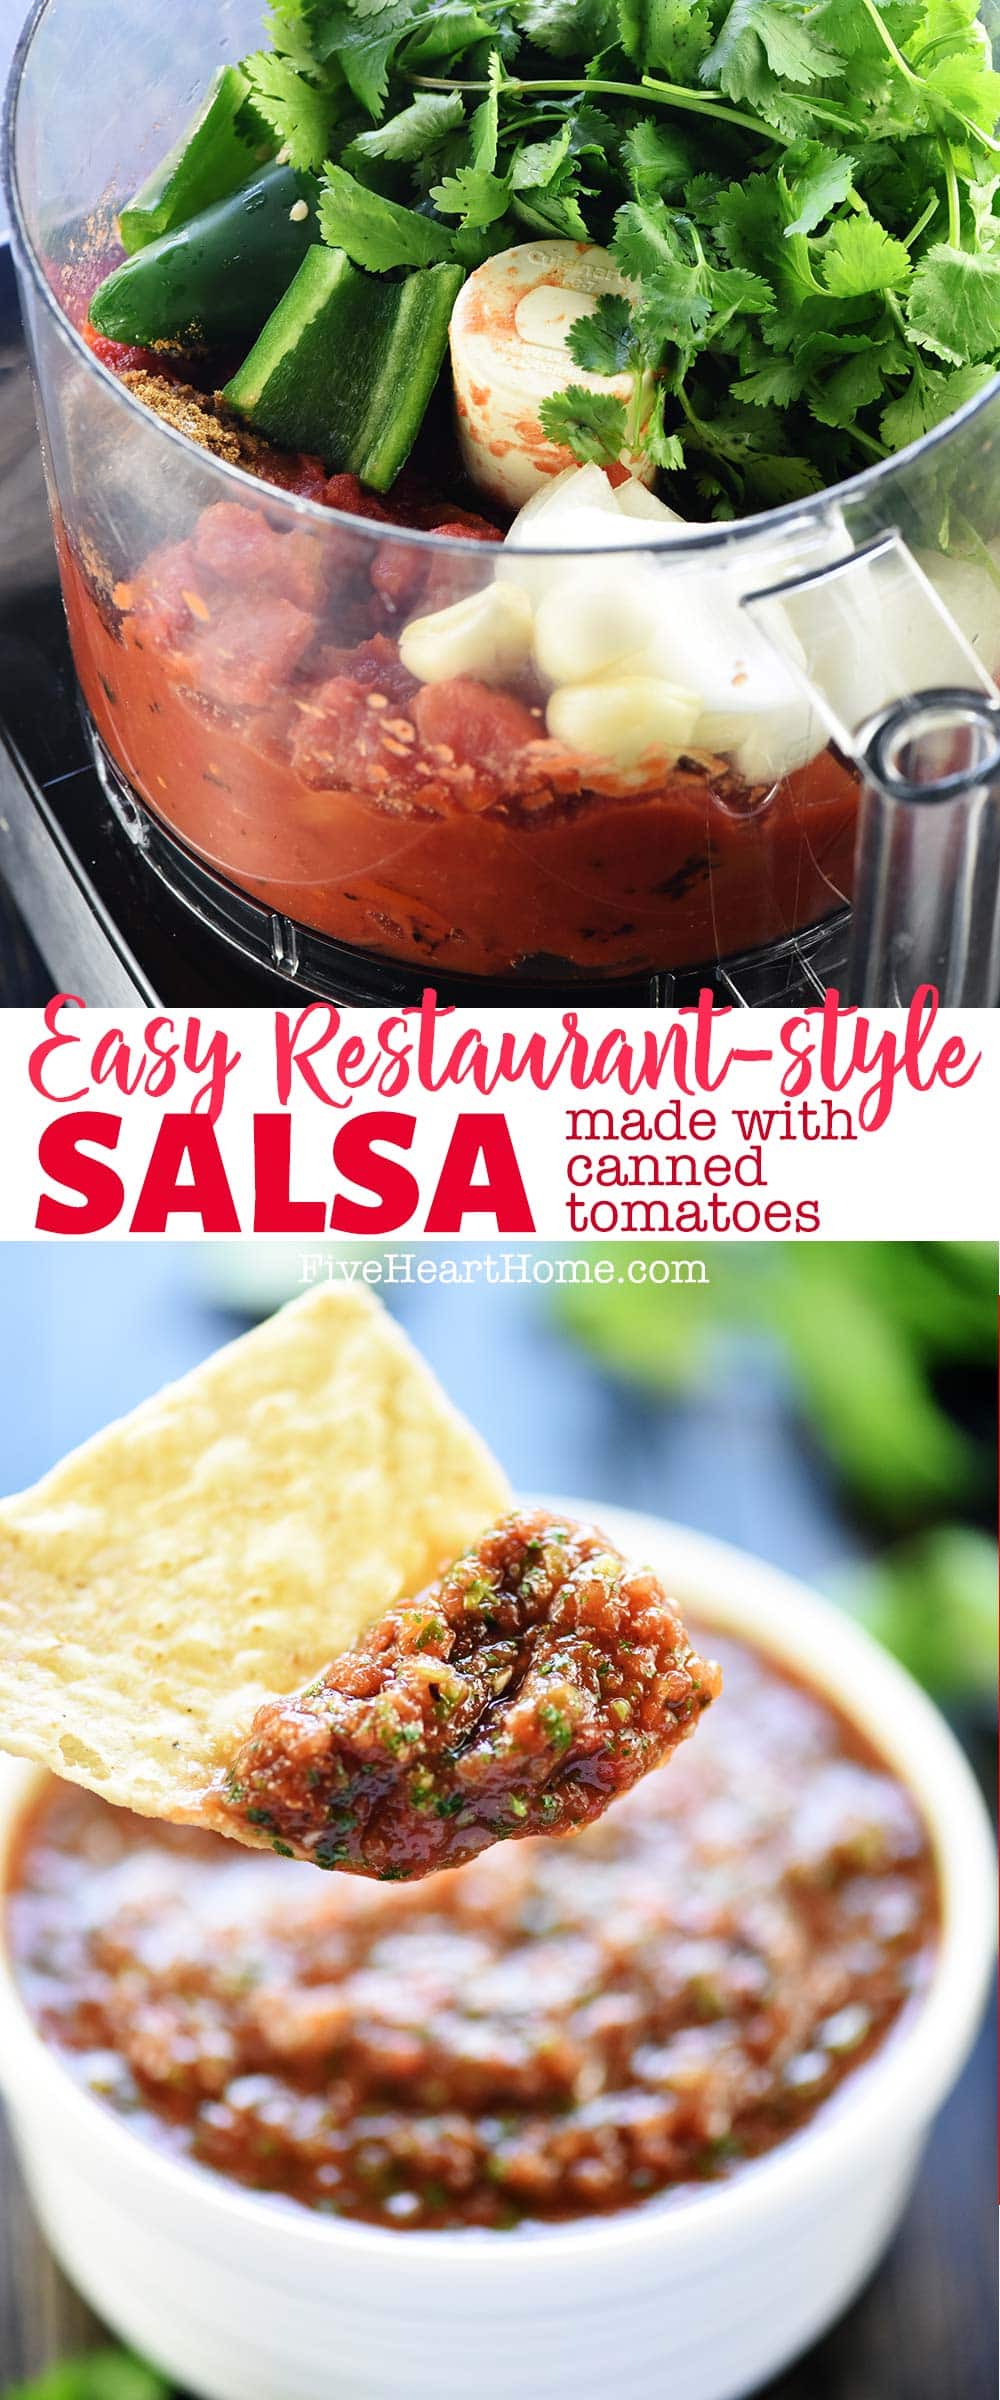 Fresh Easy Salsa (with Canned Tomatoes) ~ this fresh, homemade, easy canned tomato salsa recipe is versatile and delicious! It takes just a few minutes to throw together in the blender or food processor and it rivals the best restaurant-style salsa! | FiveHeartHome.com via @fivehearthome